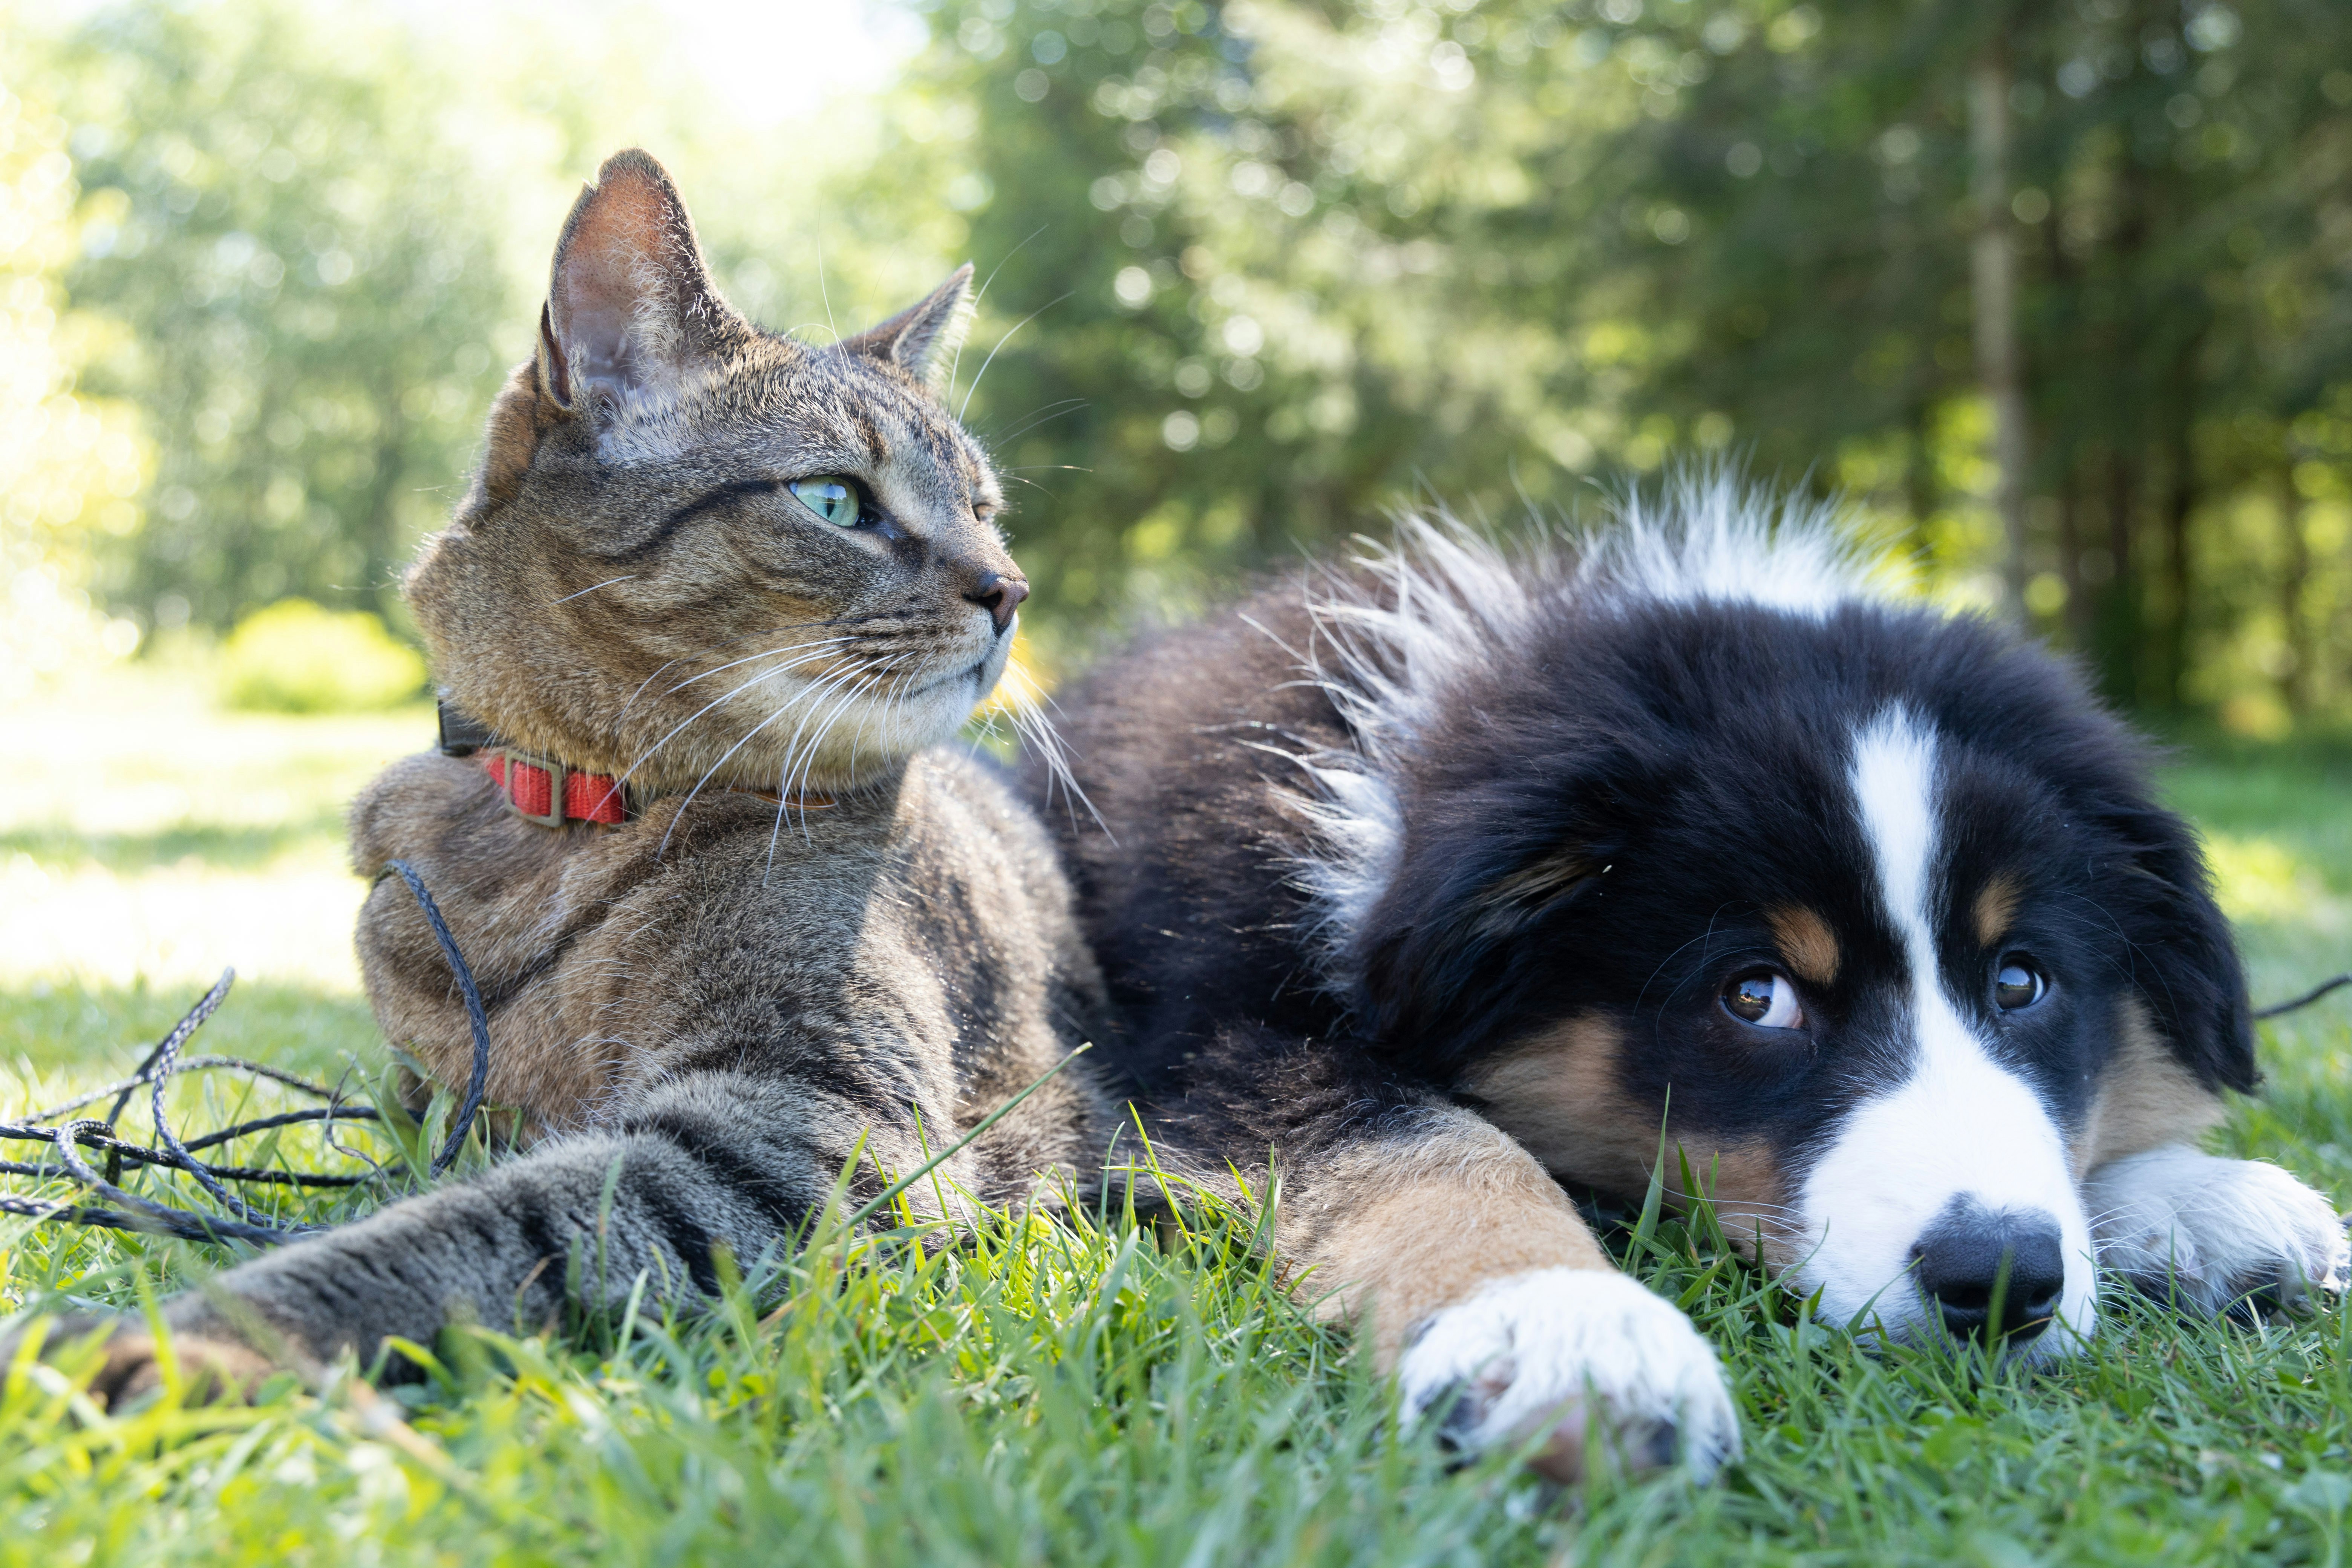 Cat and dog lying together outside